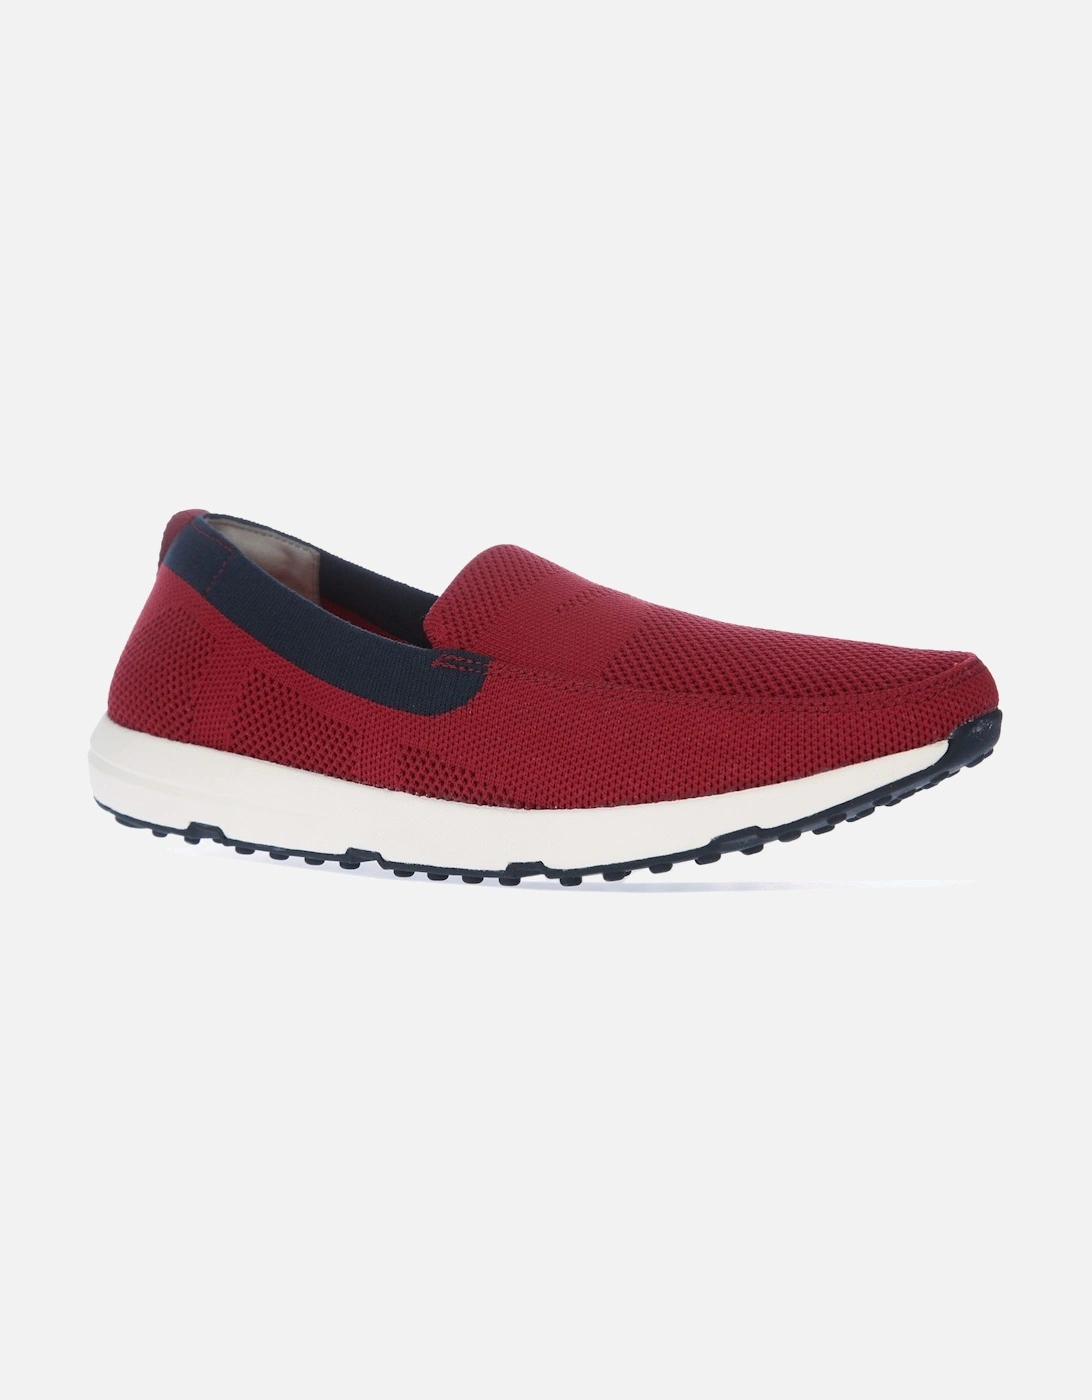 Mens Breeze Leap Knit Penny Loafers